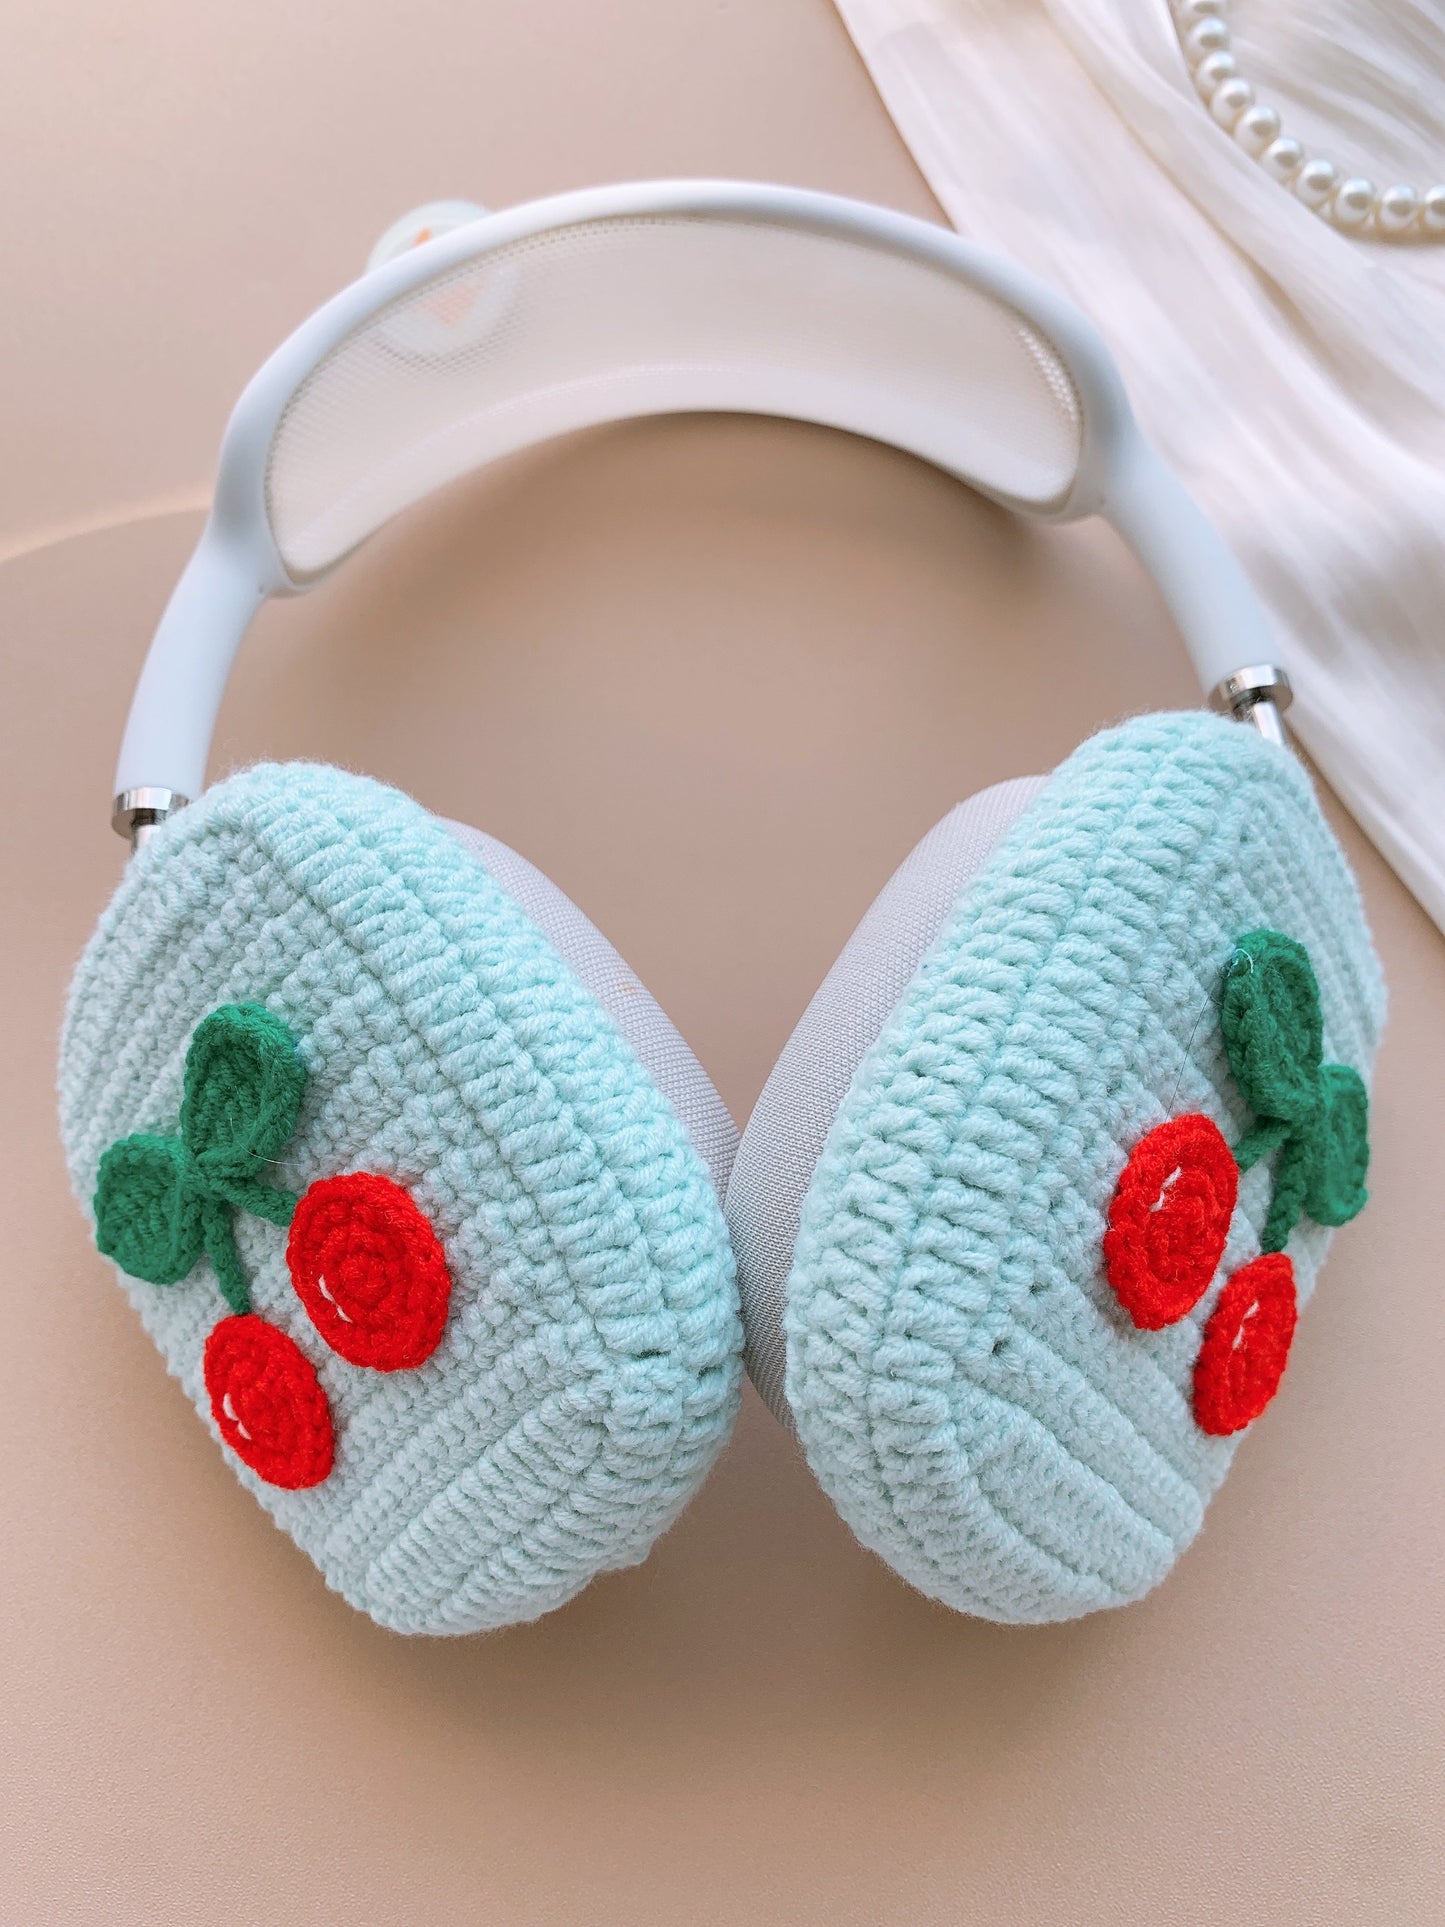 Cherry Airpods Max Cases Sony XM1000 Cases